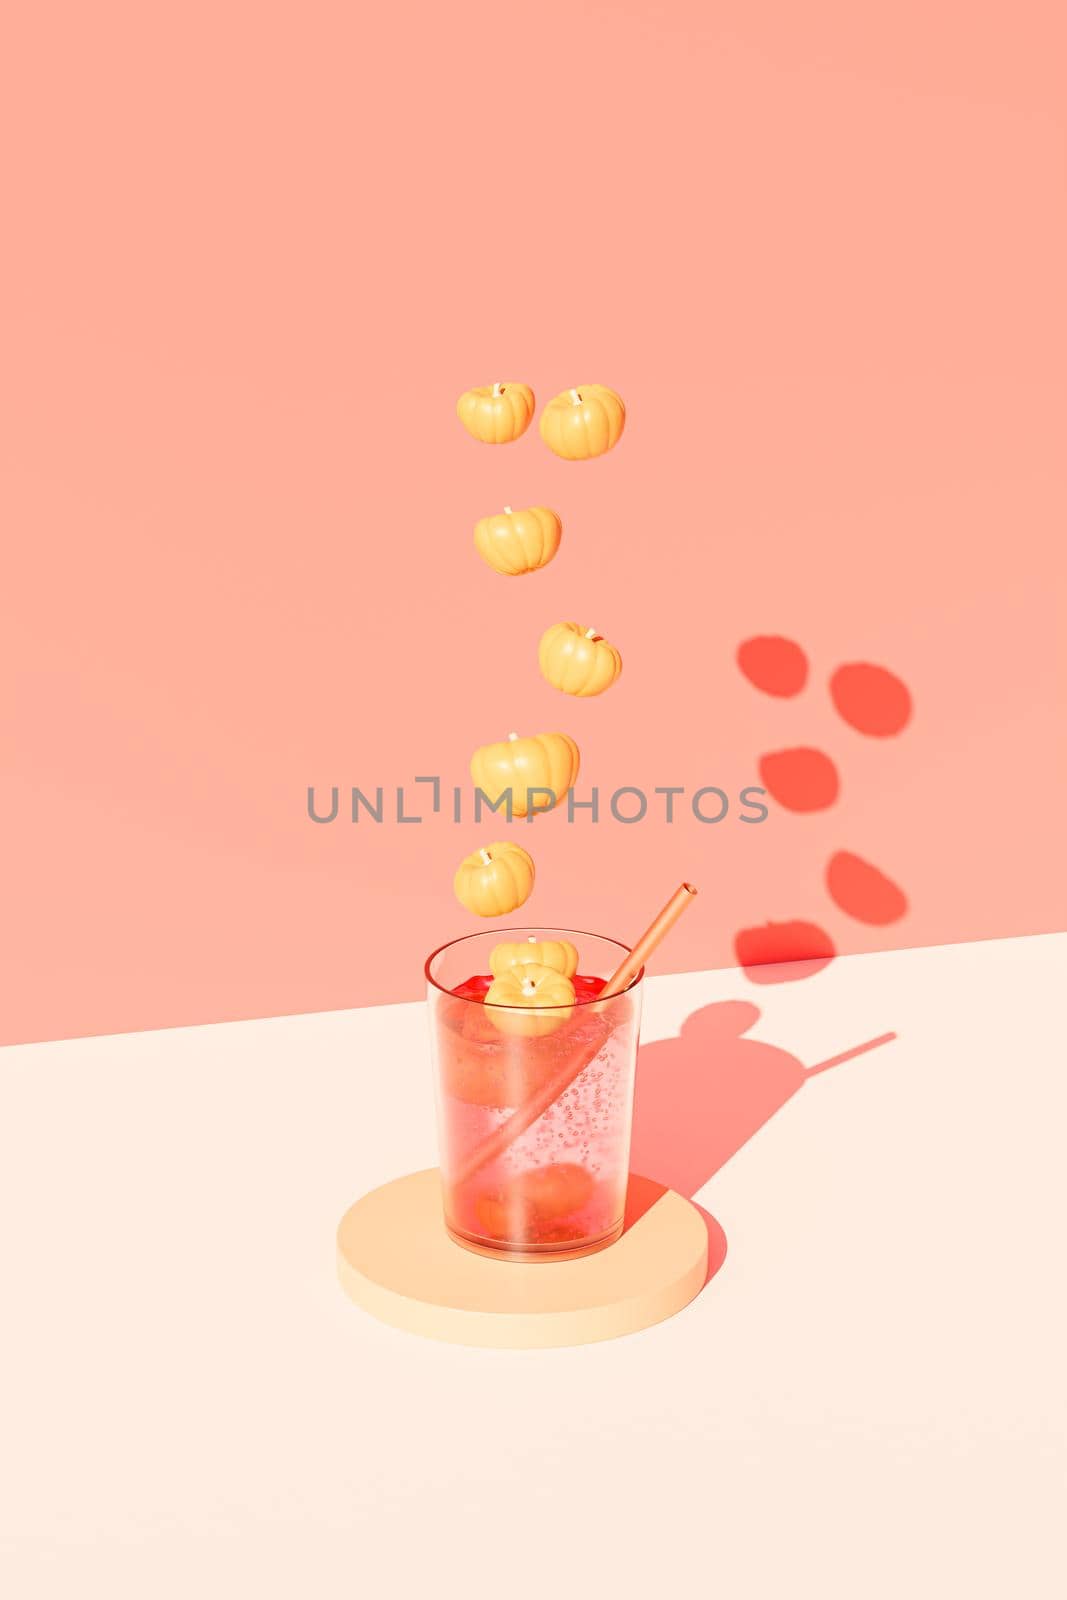 Drink in glass with pumpkins on beige background for advertising on autumn holidays or sales, 3d render by Frostroomhead